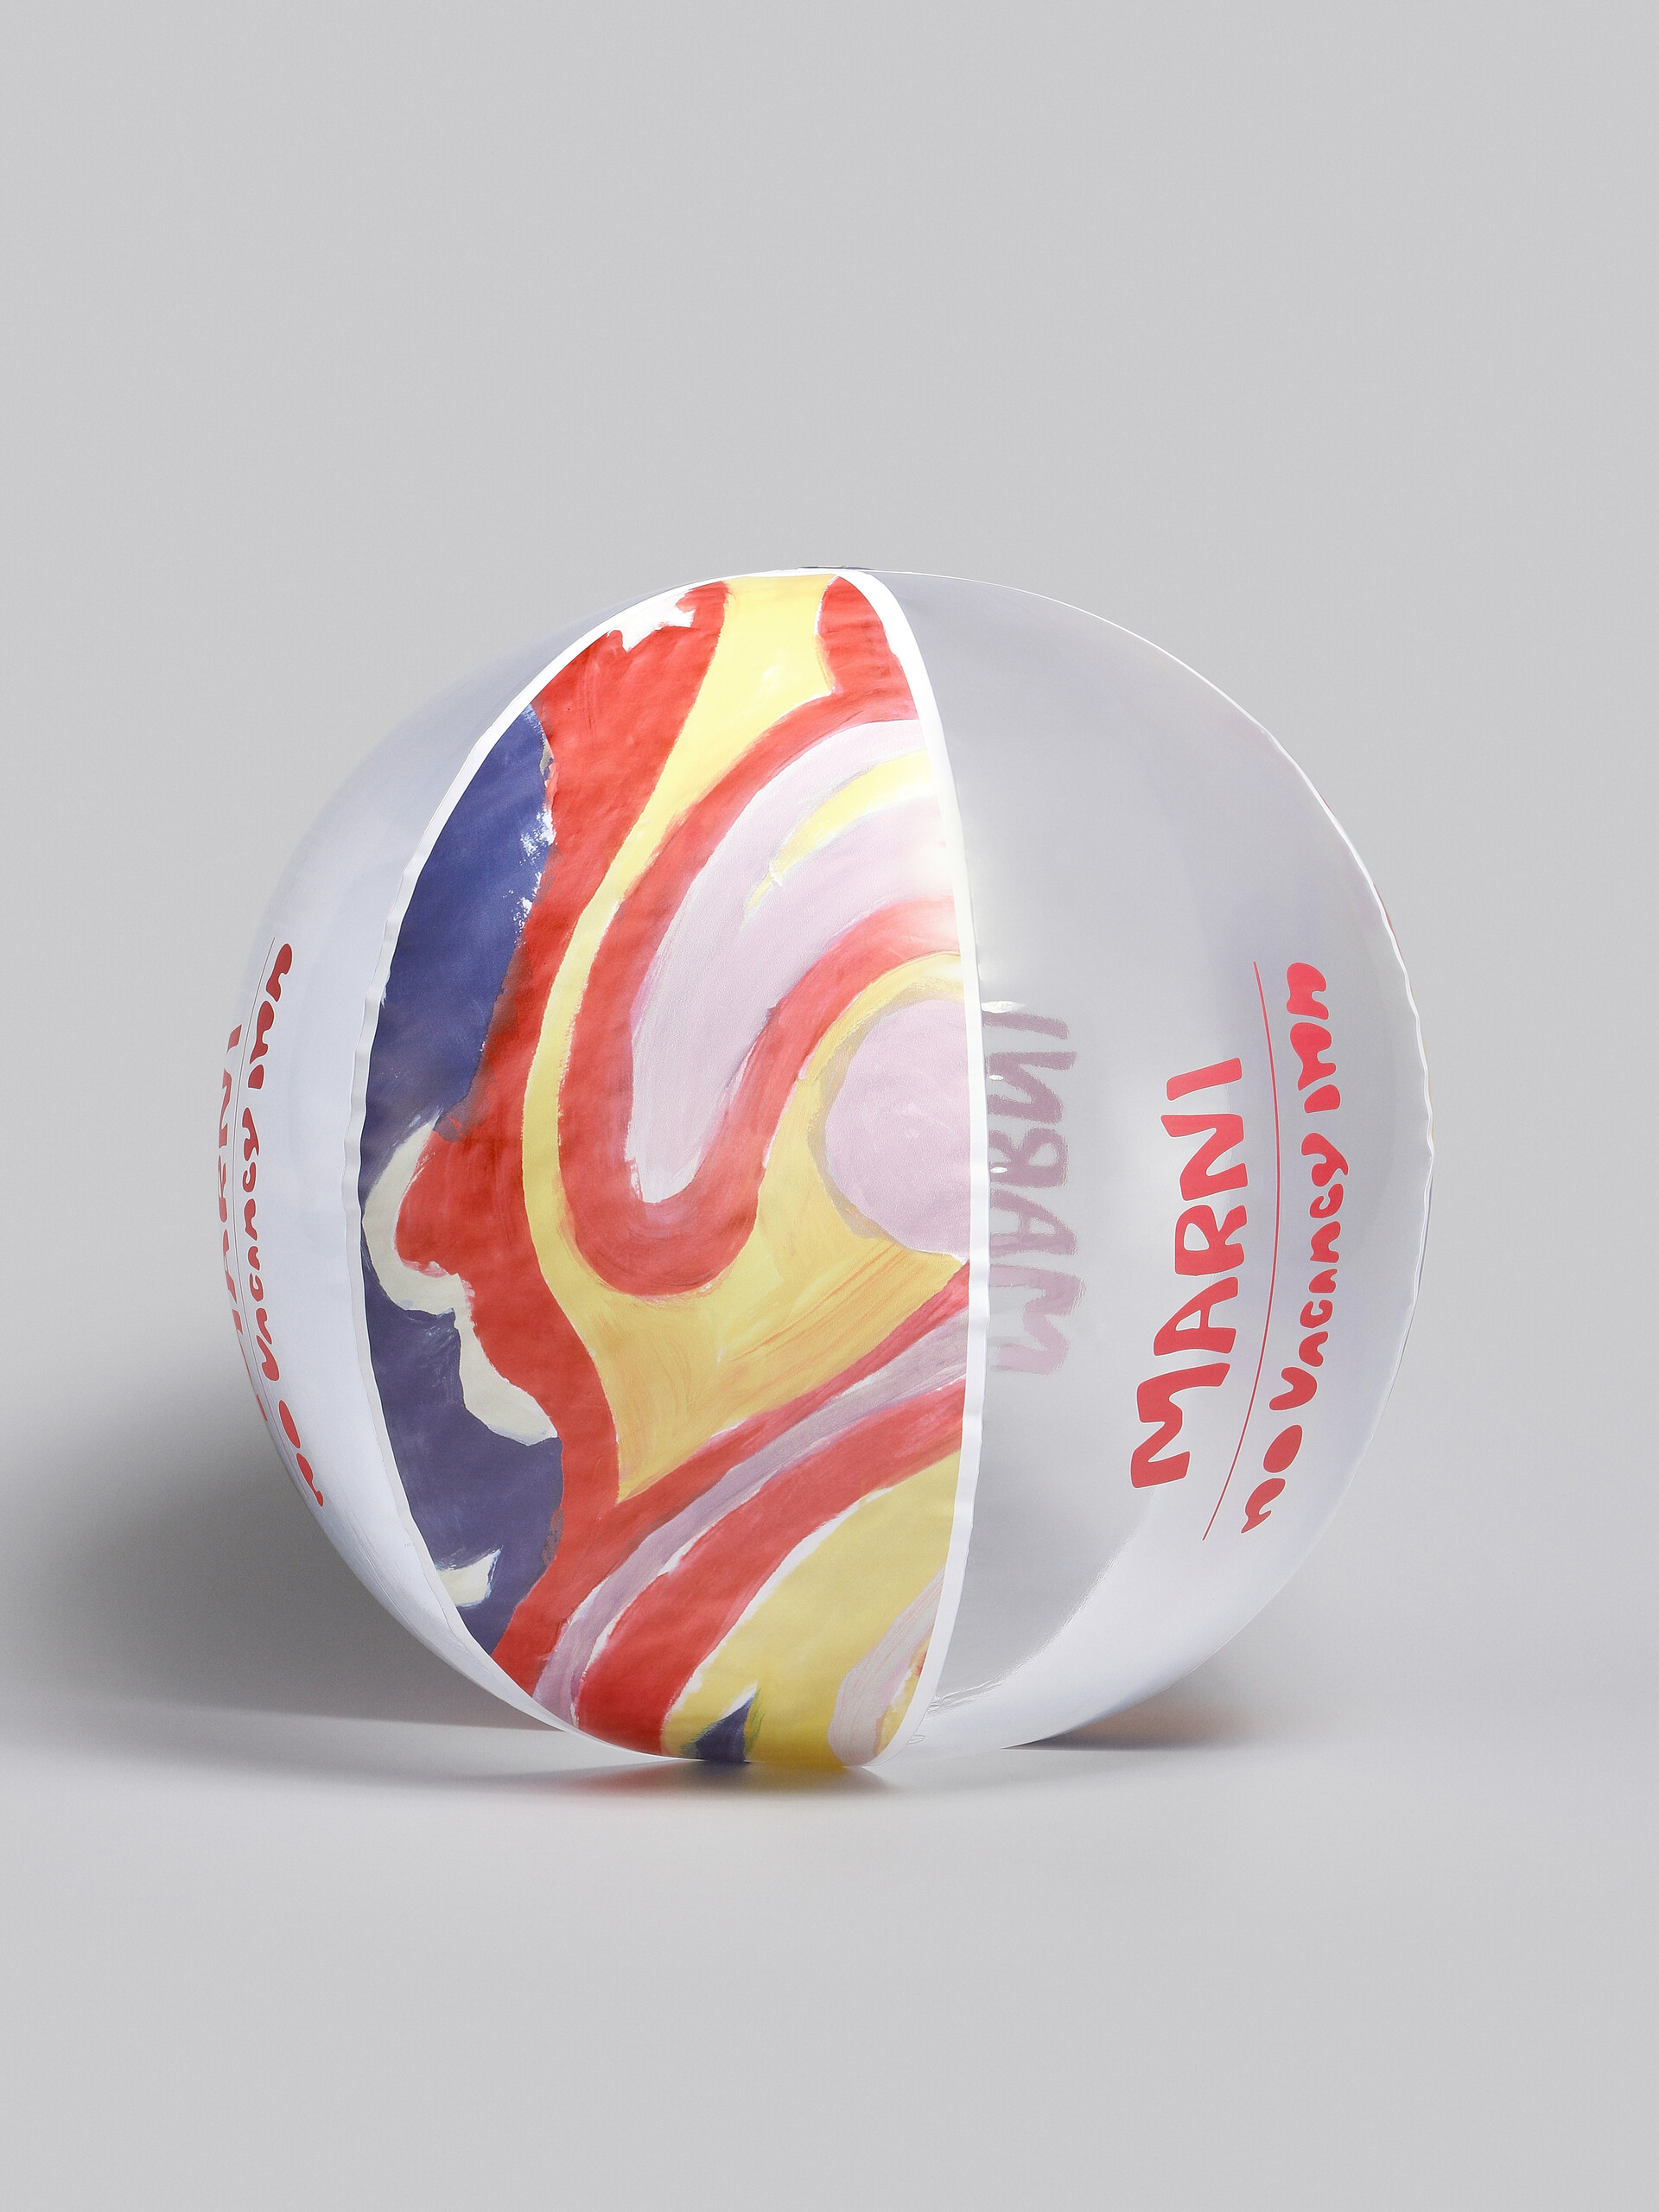 Marni x No Vacancy Inn - Inflatable ball with Galactic Paradise print - Other accessories - Image 2